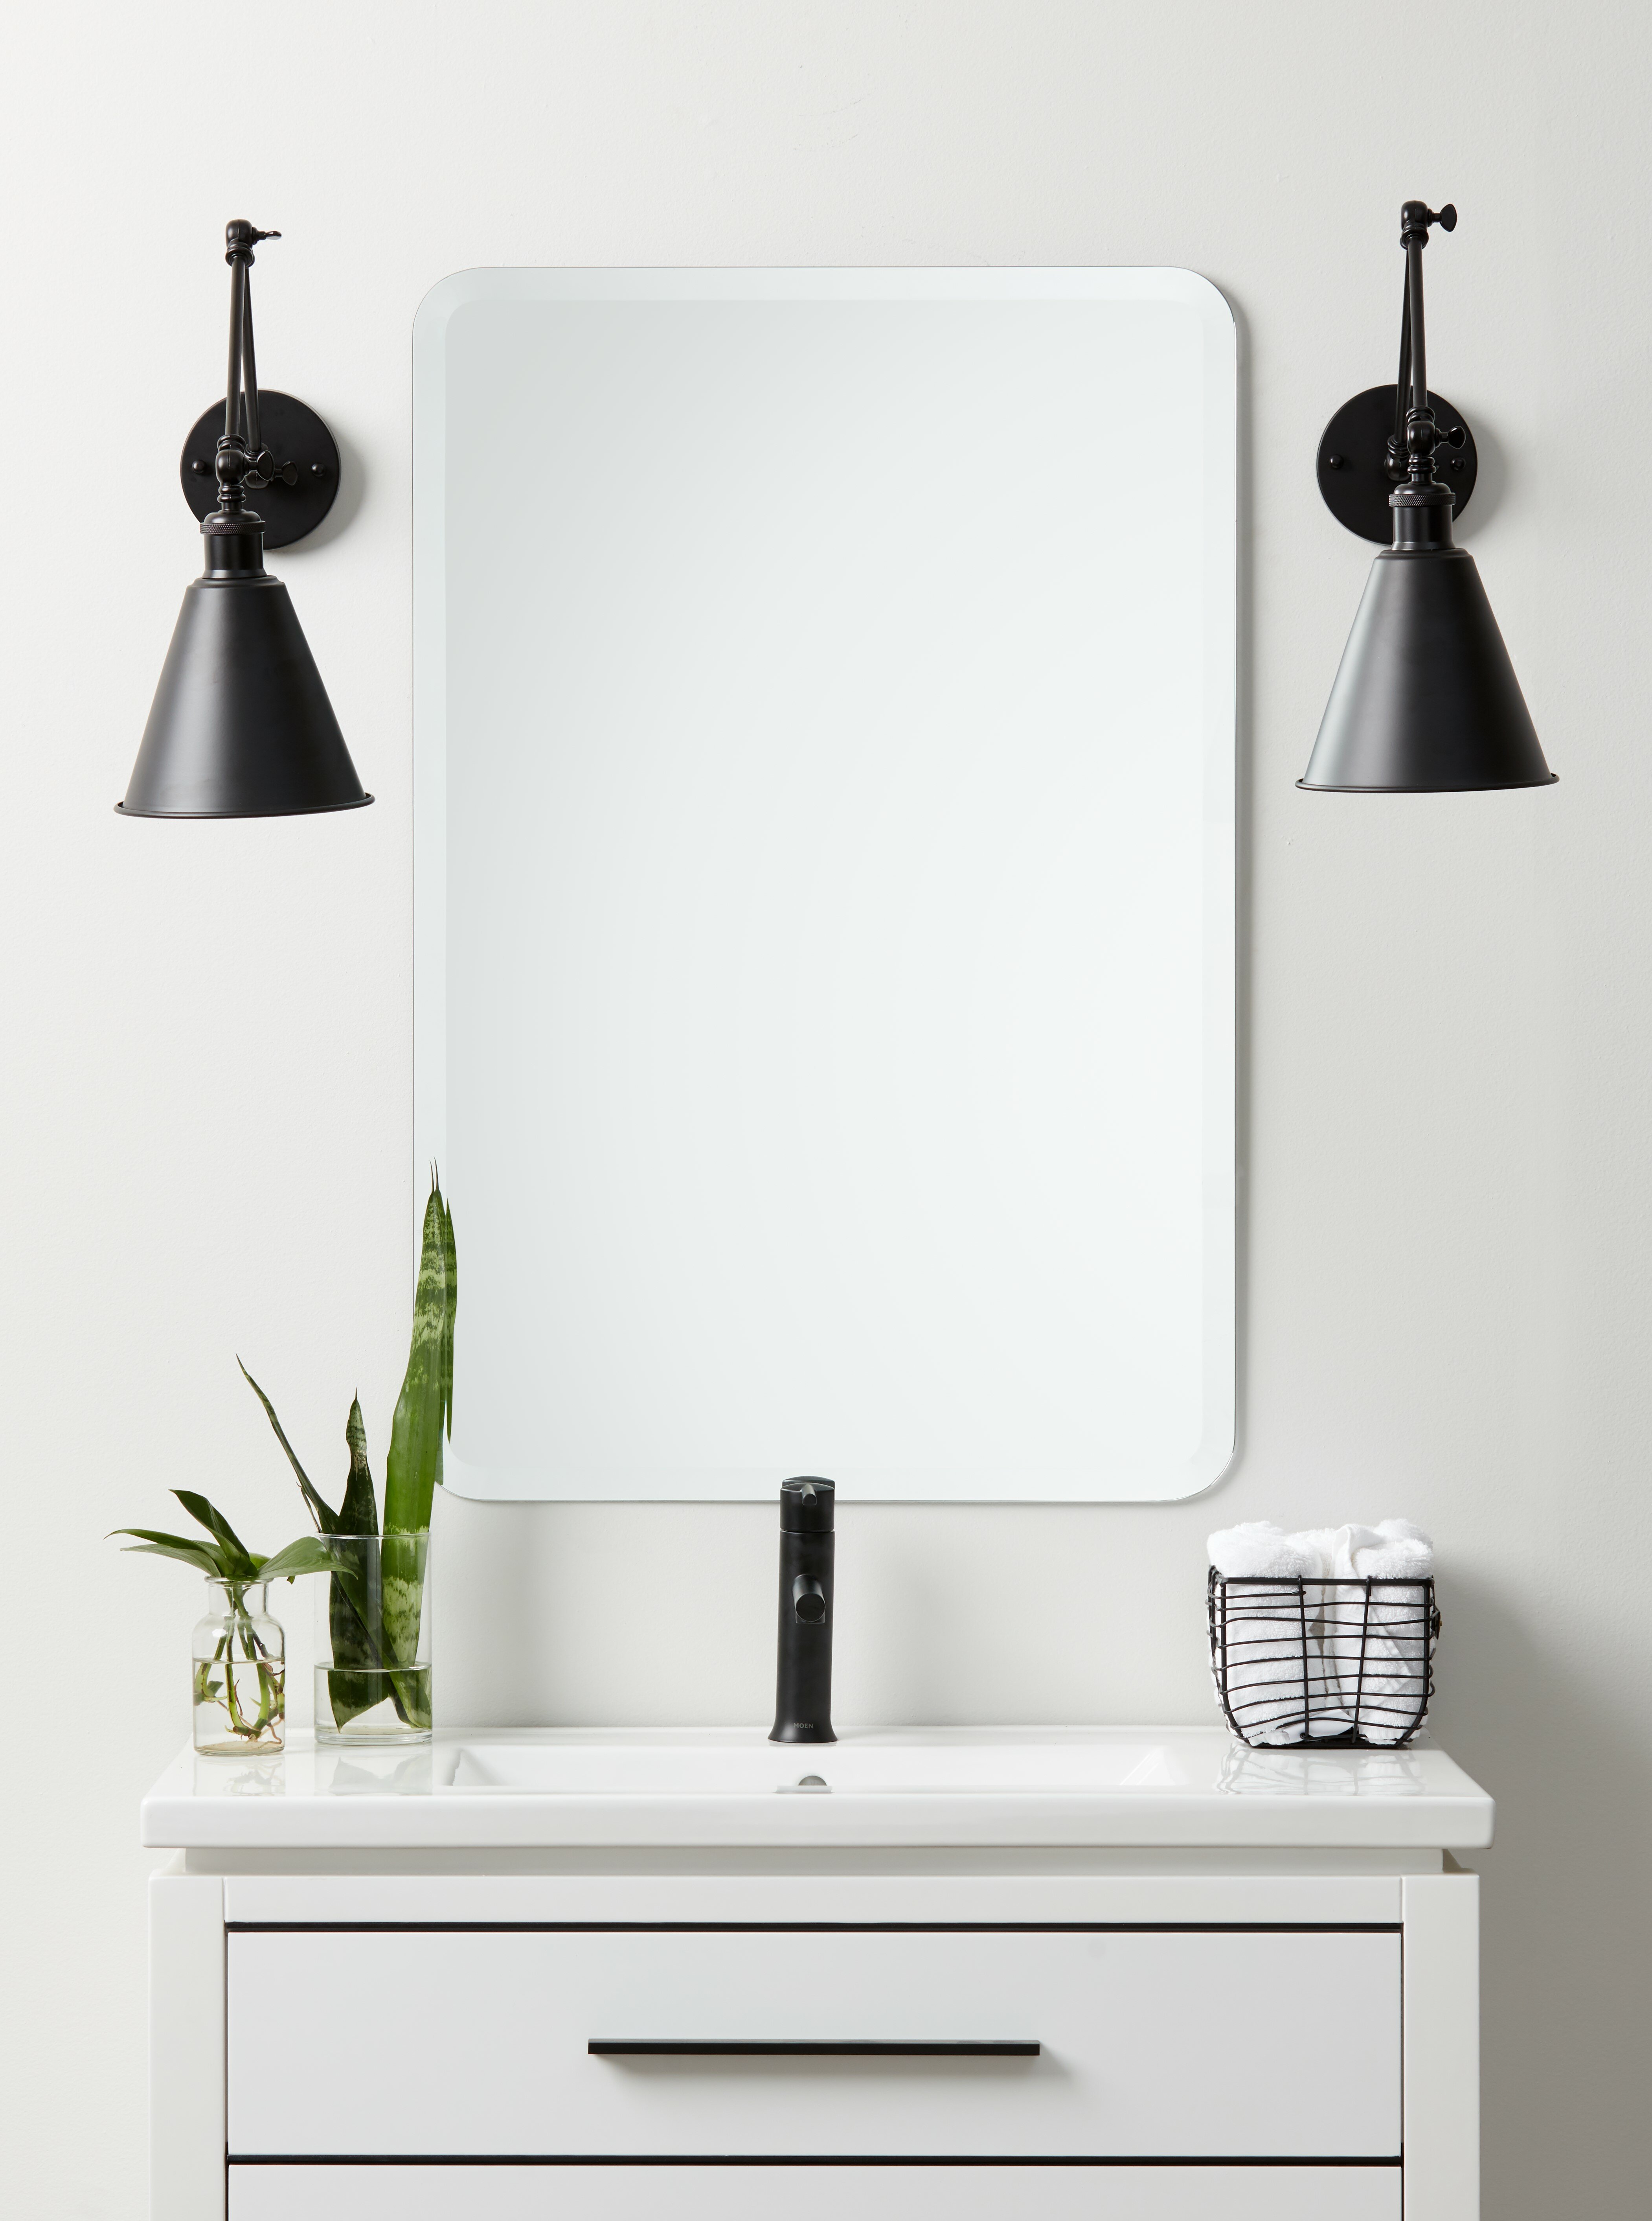 Details about   Plain Bathroom Mirror Wall Mounted Modern Bevelled Luxury Frameless Round Square 